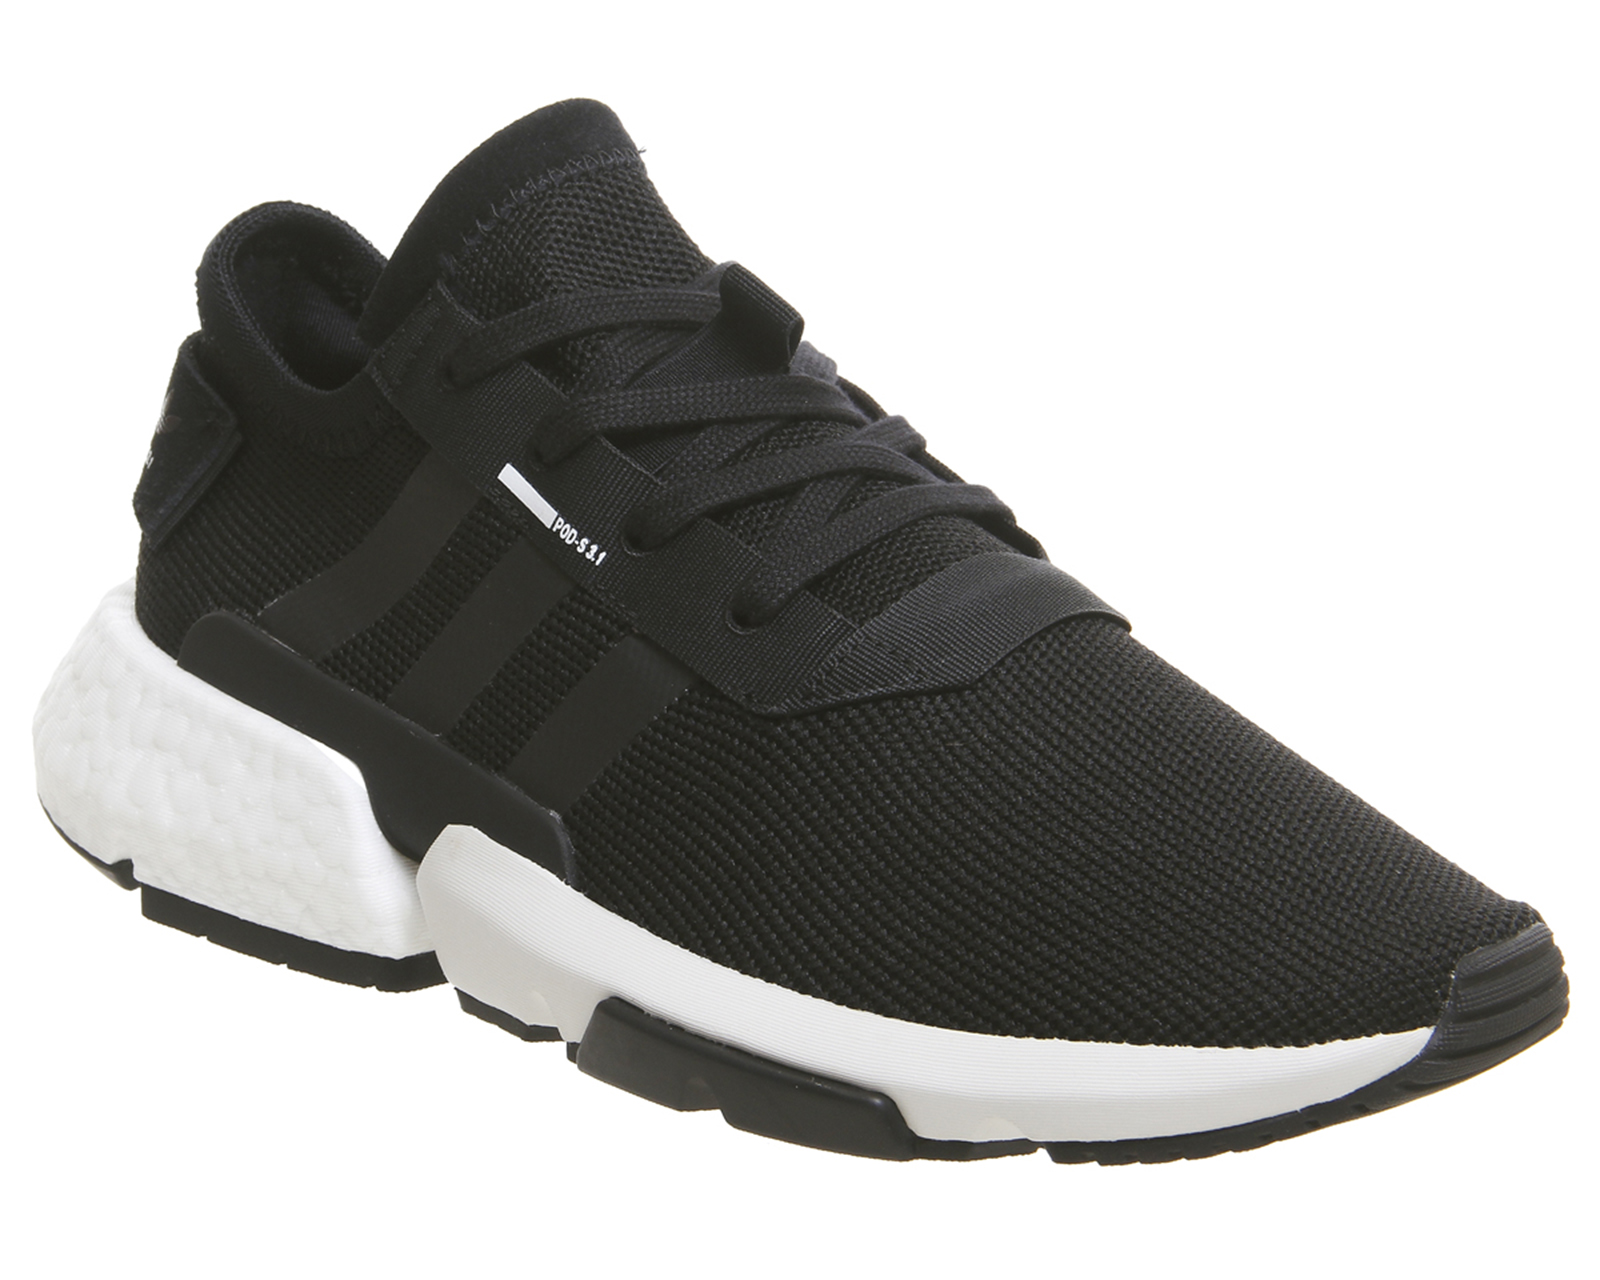 adidas Pod S3.1 Trainers Black White - His trainers